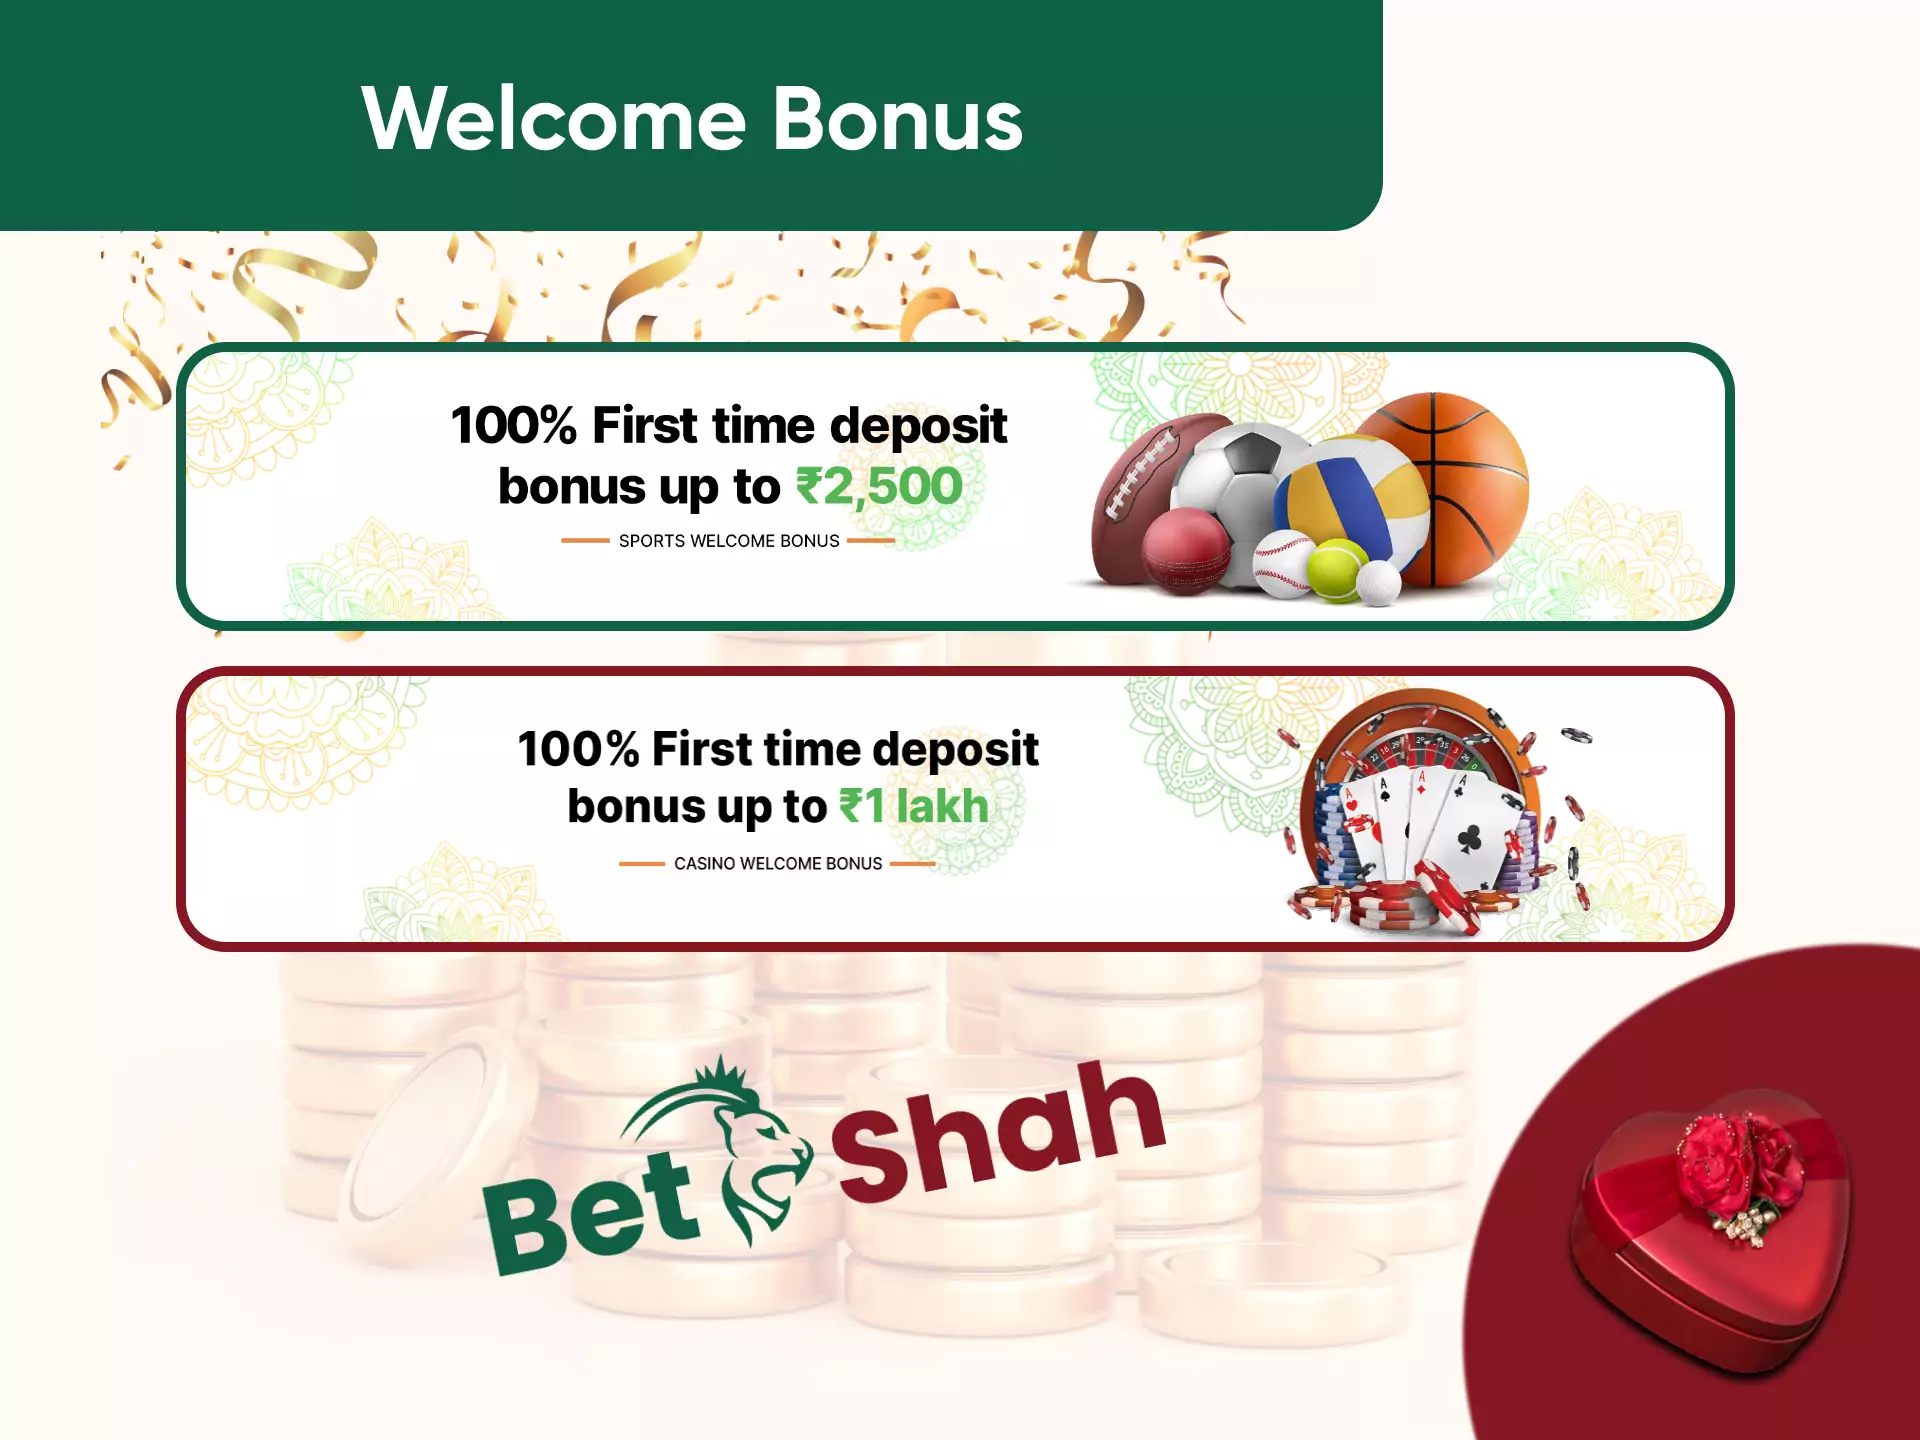 New users of Betshah get welcome bonuses.